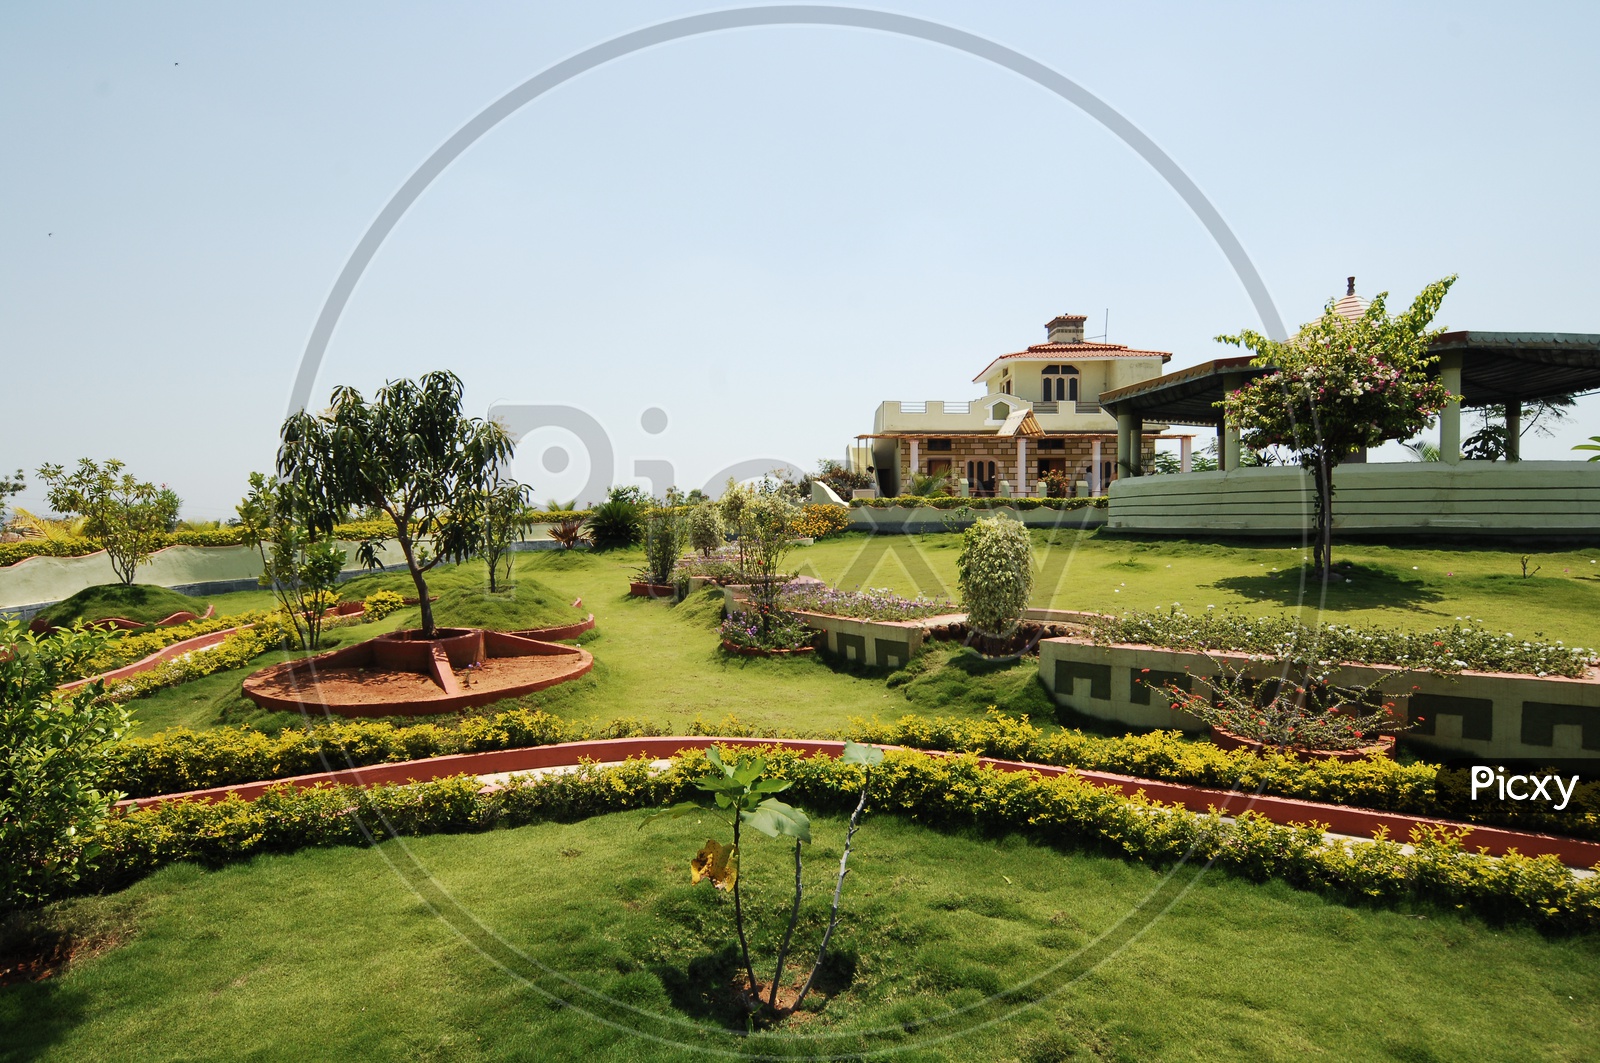 Lawn Garden In a House Compound